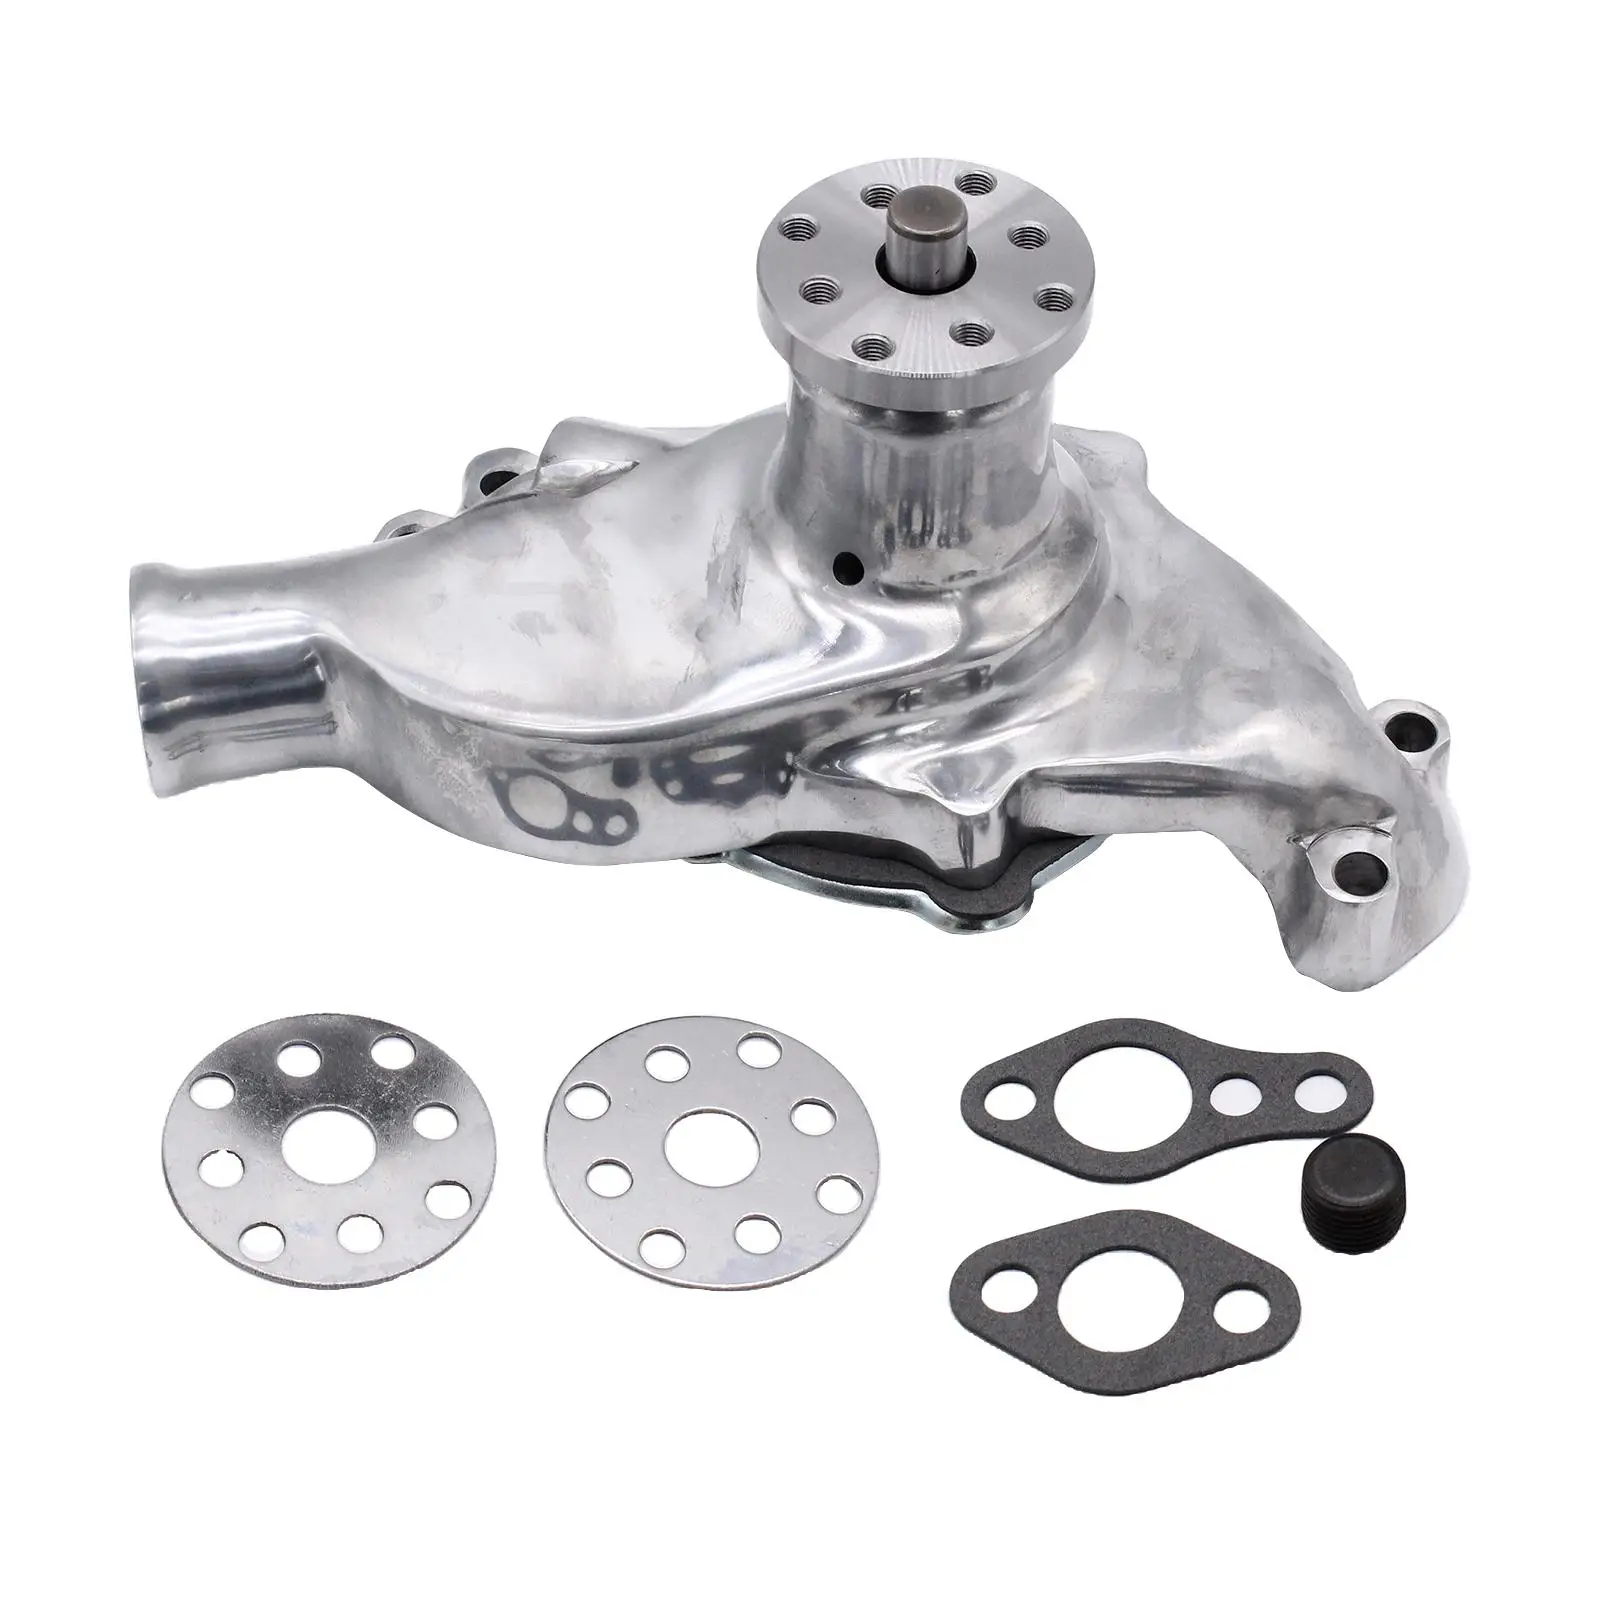 High Volume Water Pump Large Water Flow Spare Parts Metal for Chevy V8